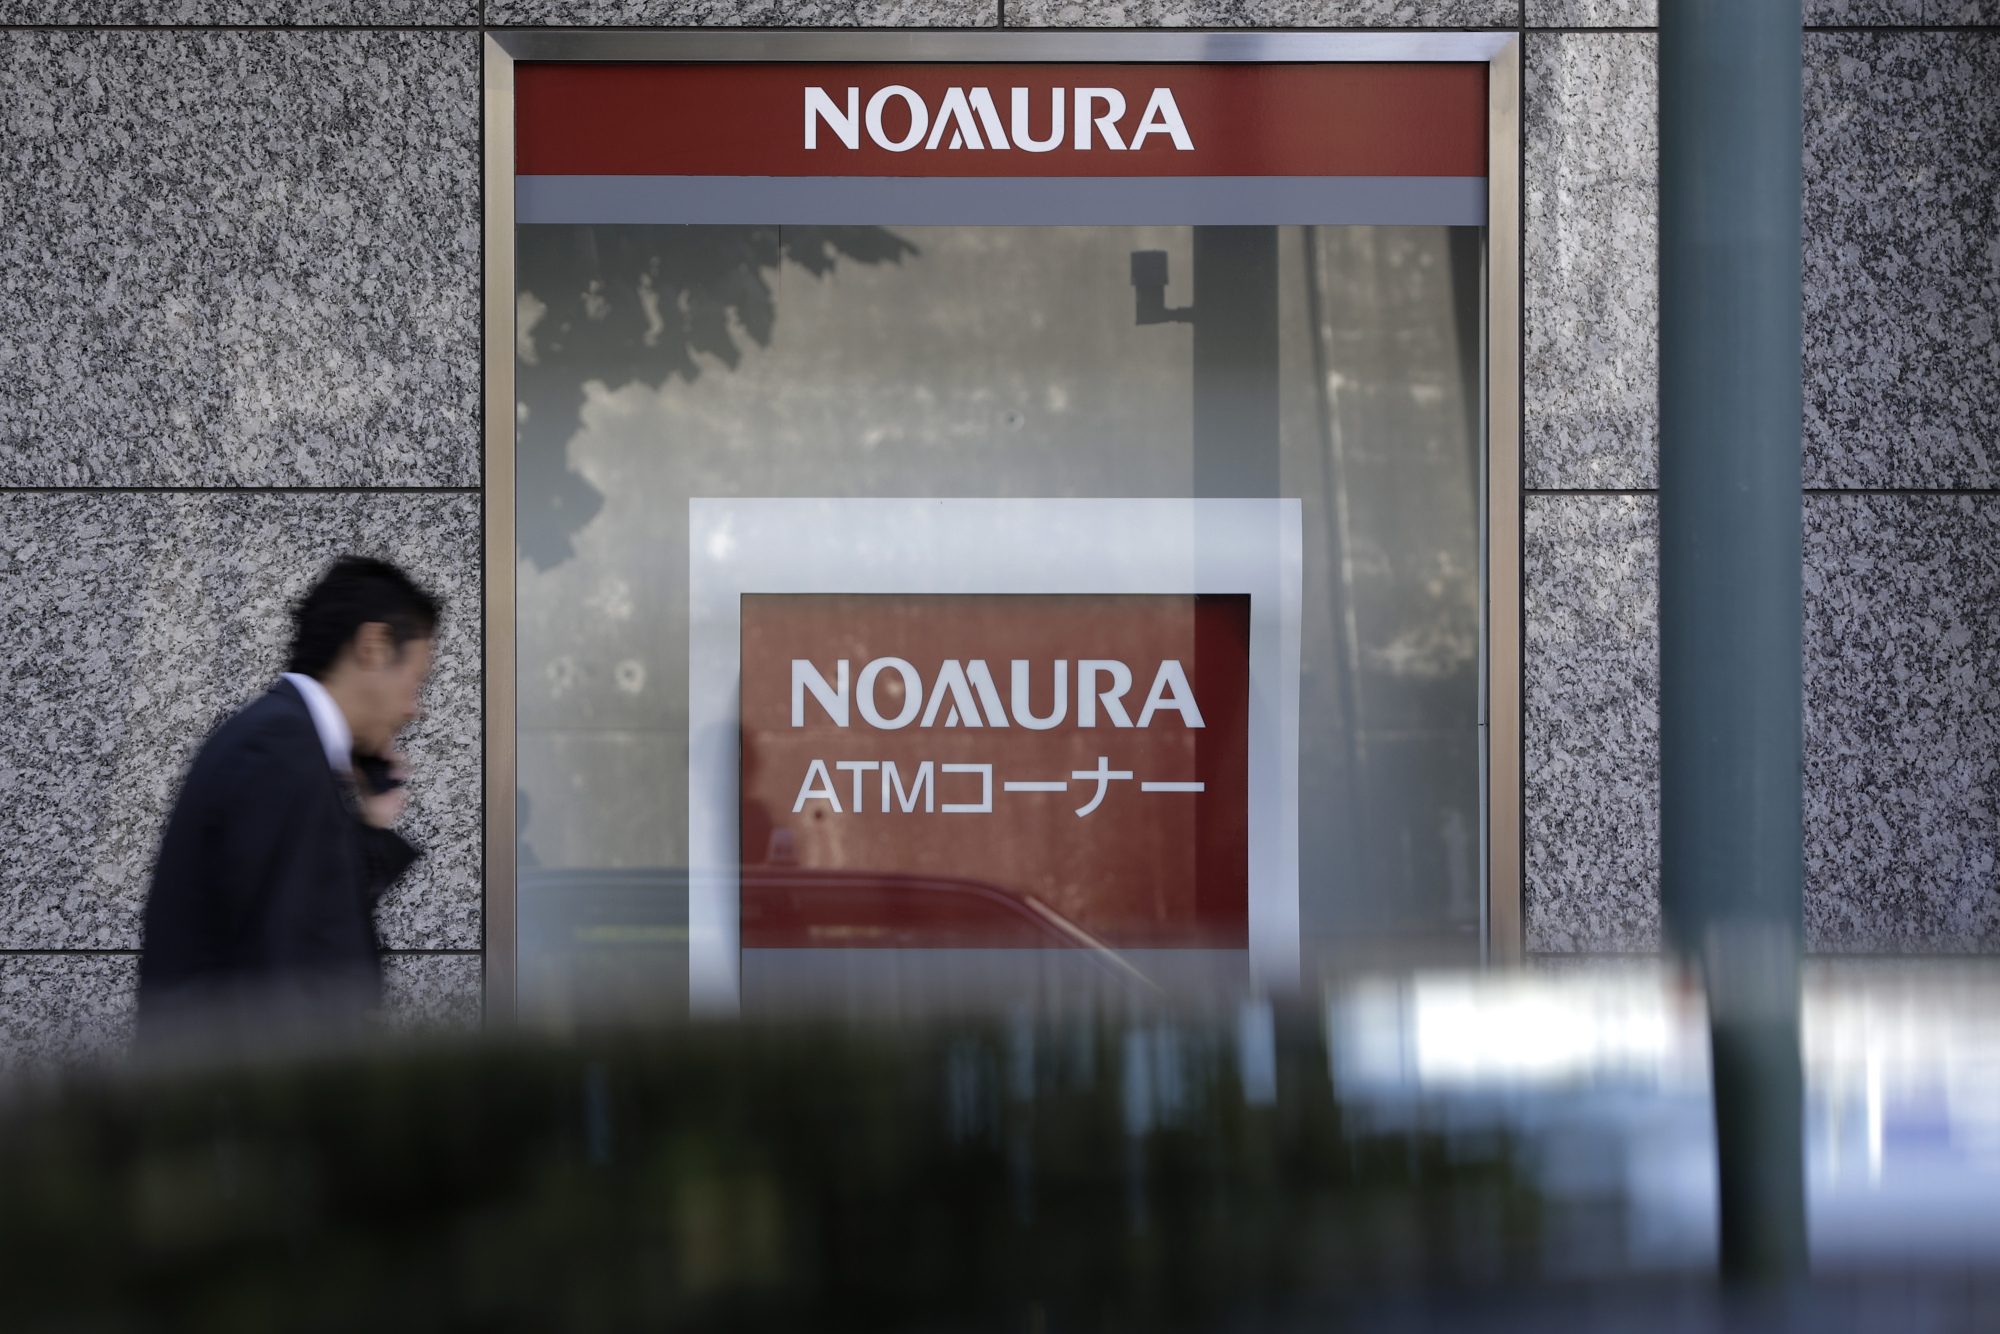 Nomura shareholders urged to reject CEO reappointment after information leak